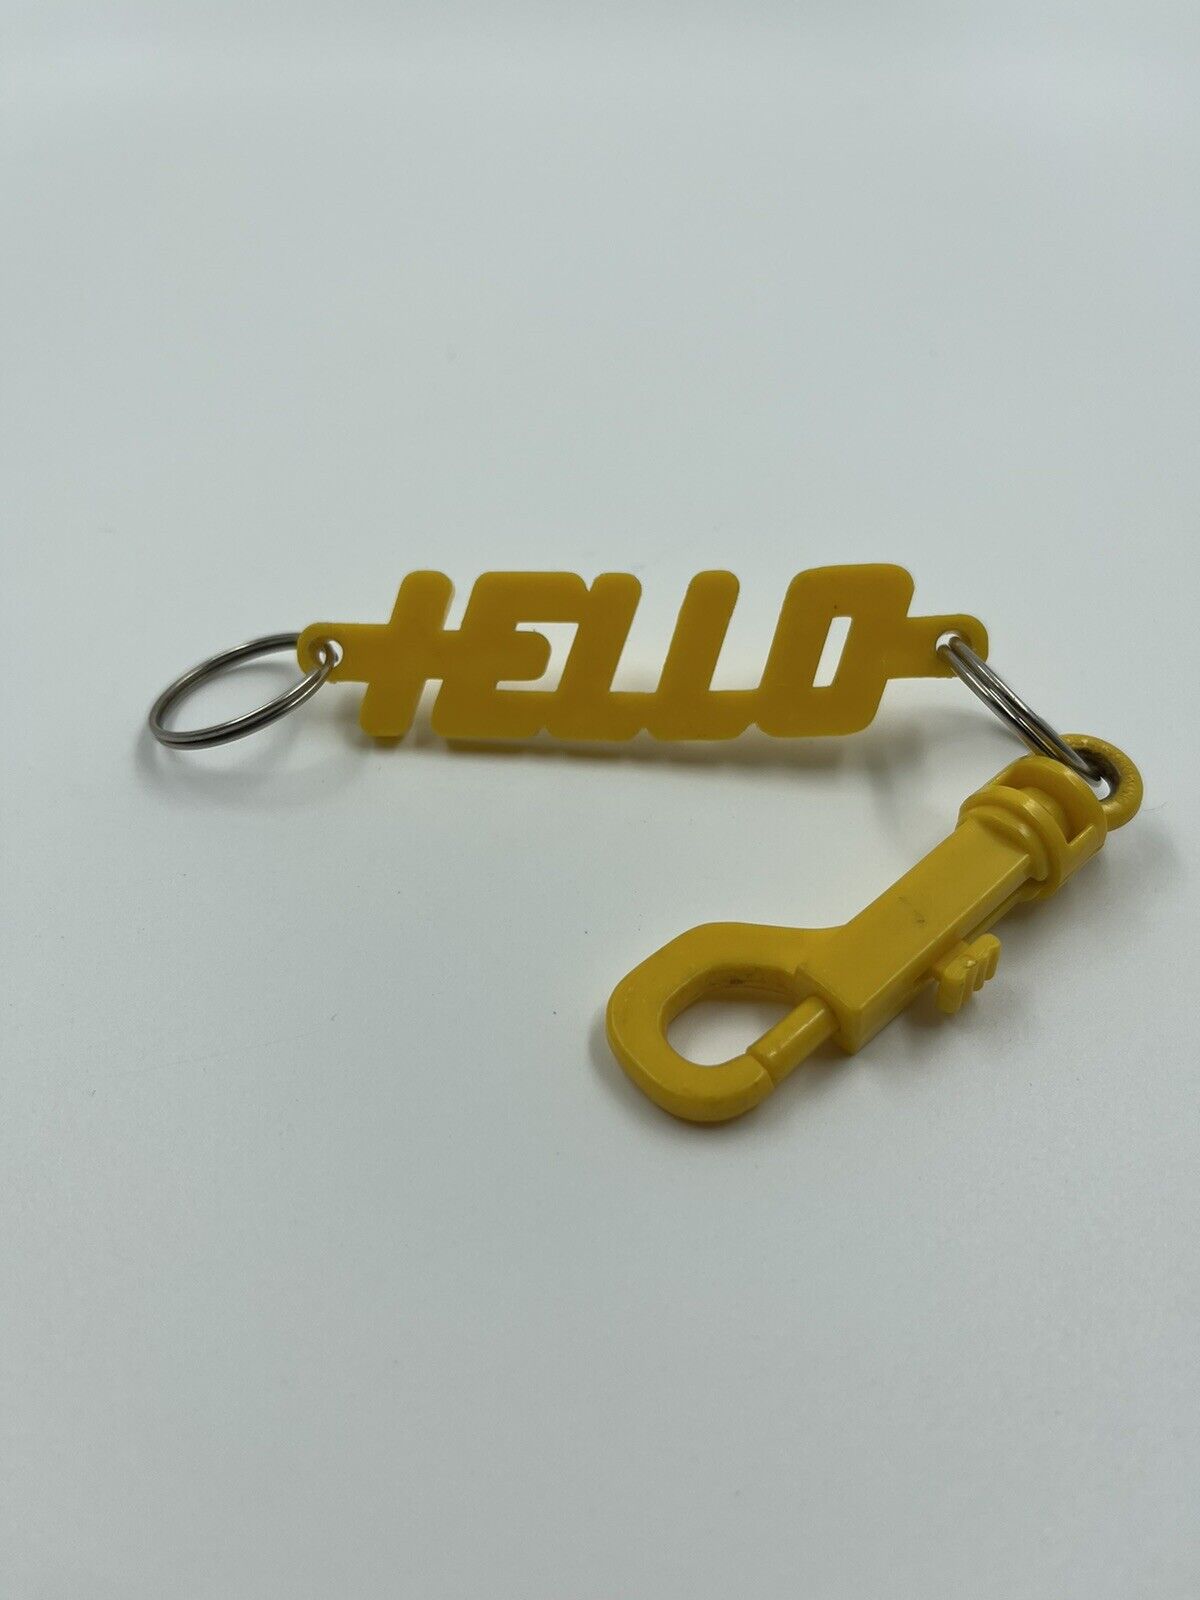 Vintage 1990s HELLO Spell Out Keychain Key Chain Key Ring